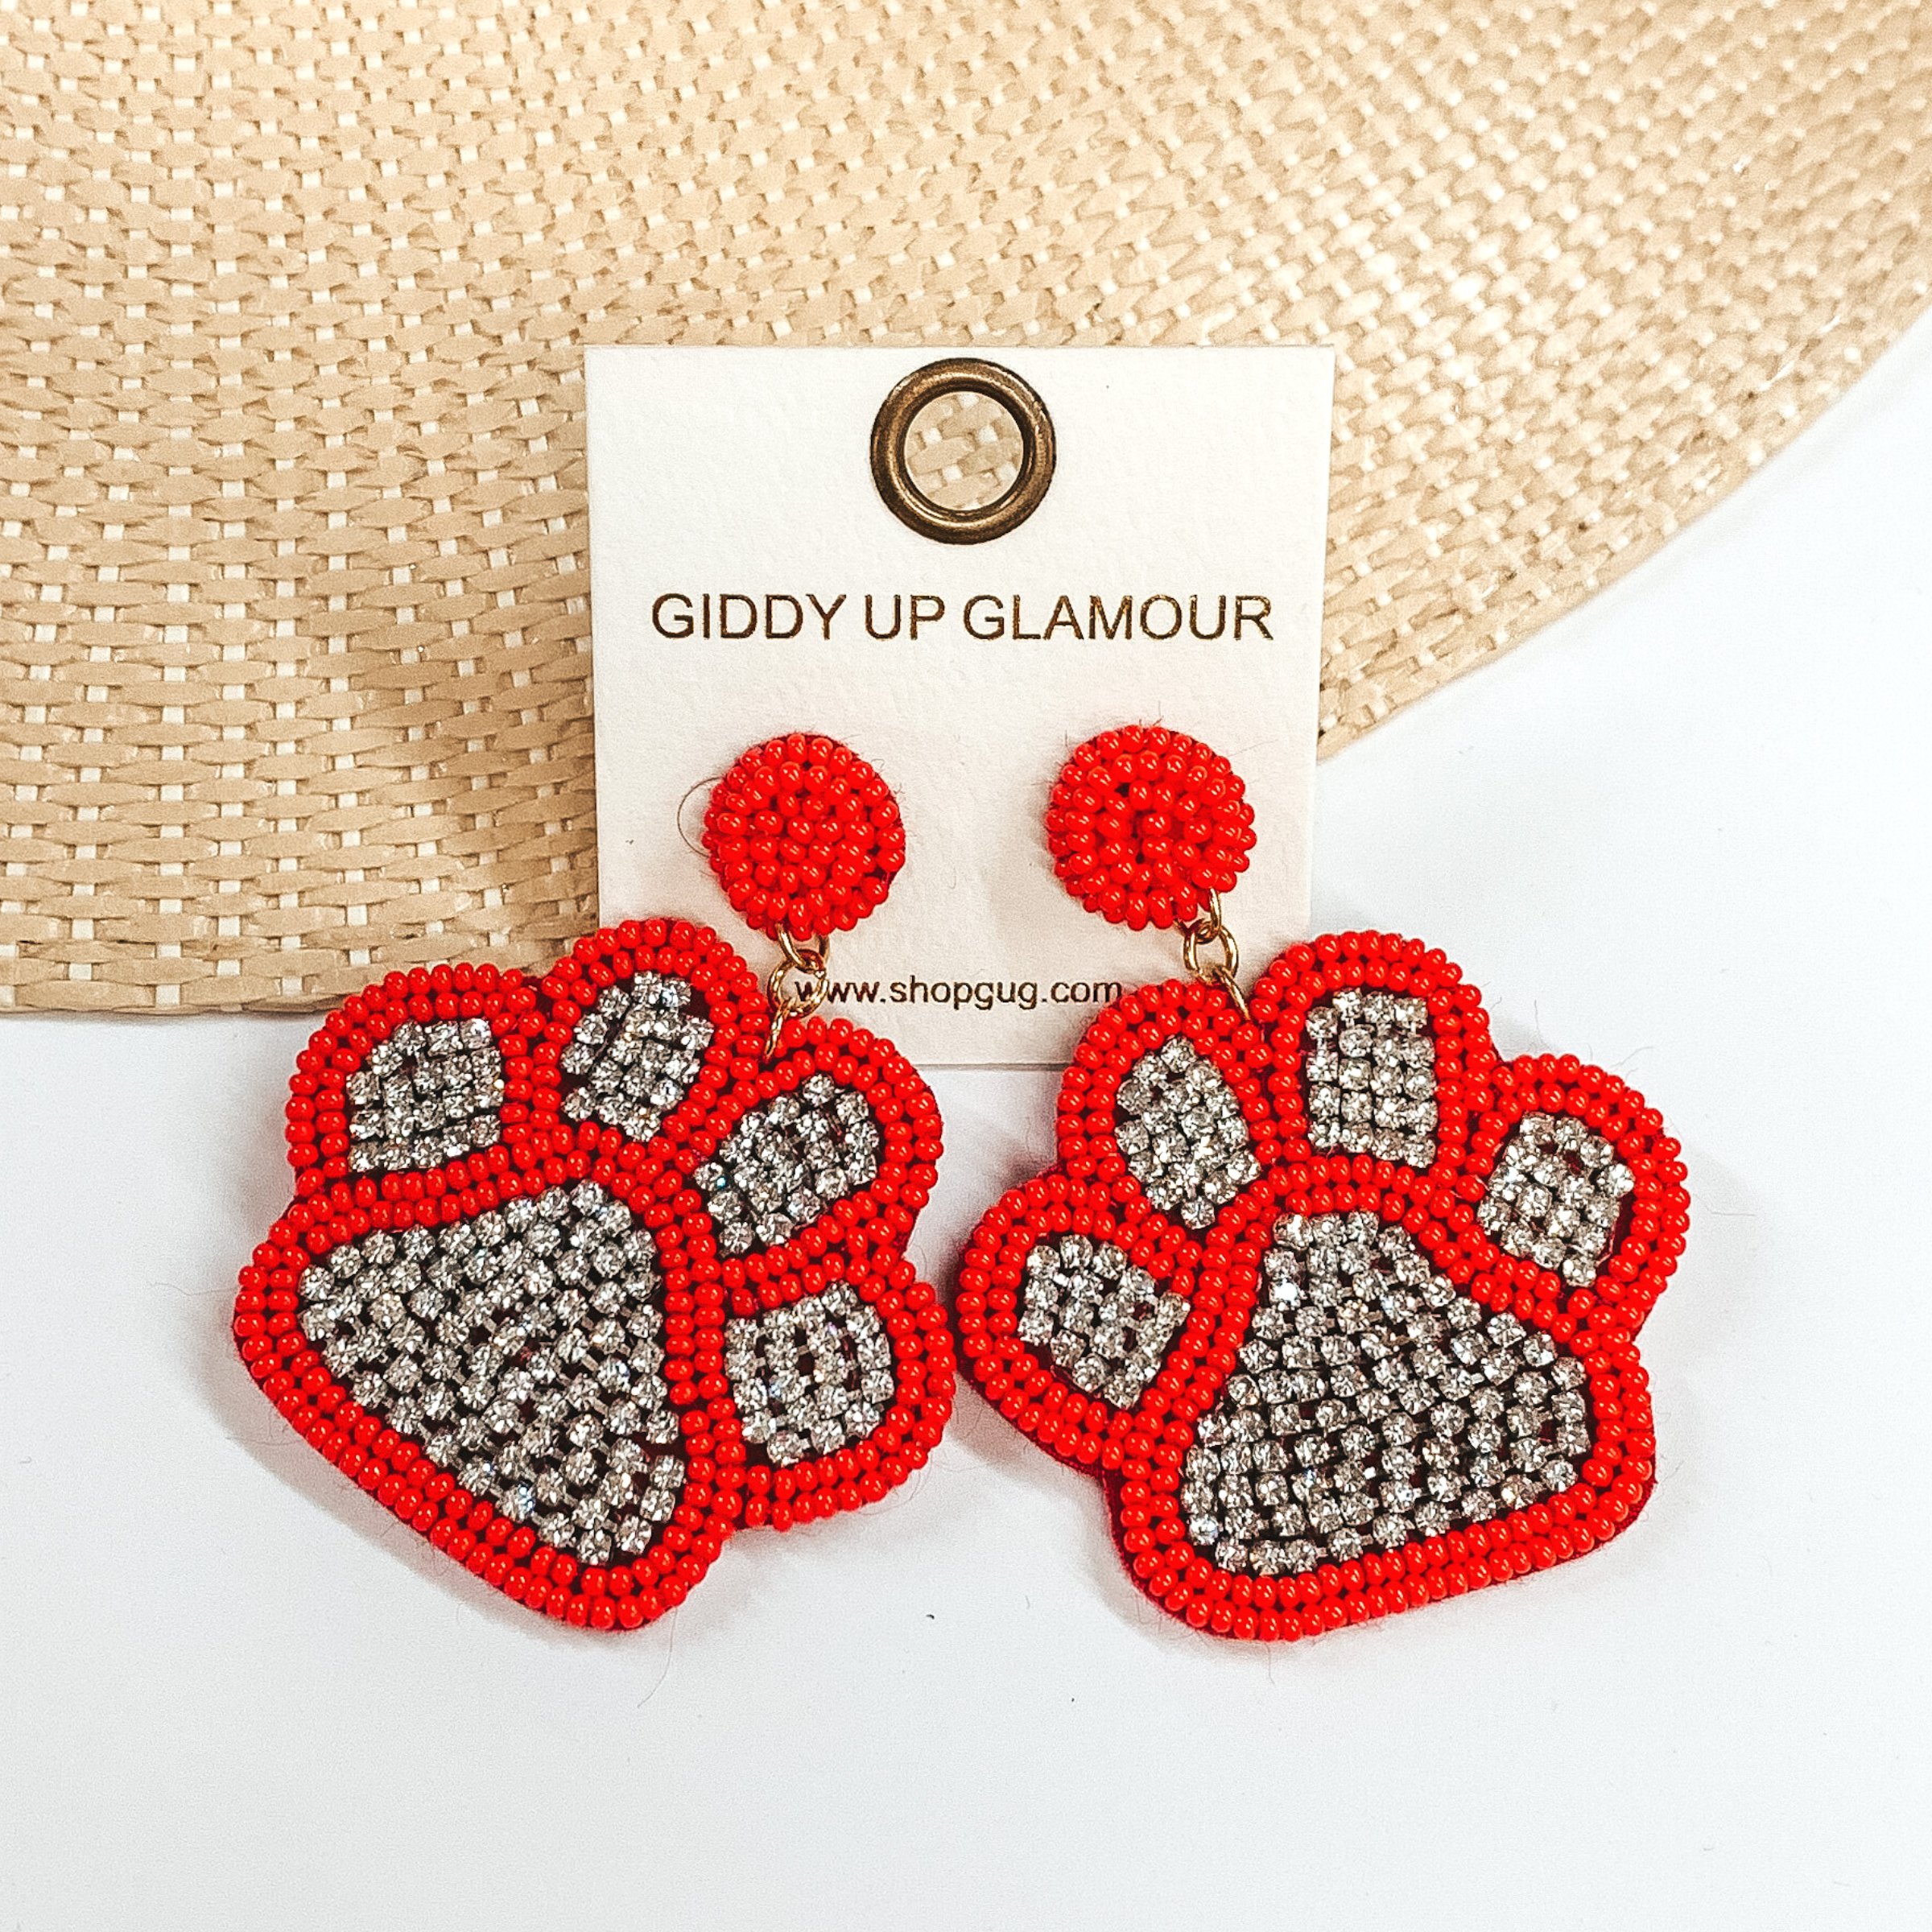 Pictured are a pair of beaded post back earrings with paw print pendants. These earrings include red orange beads and clear crystals in the center. These earrings are pictured laying on a straw hat brim on a white background. 